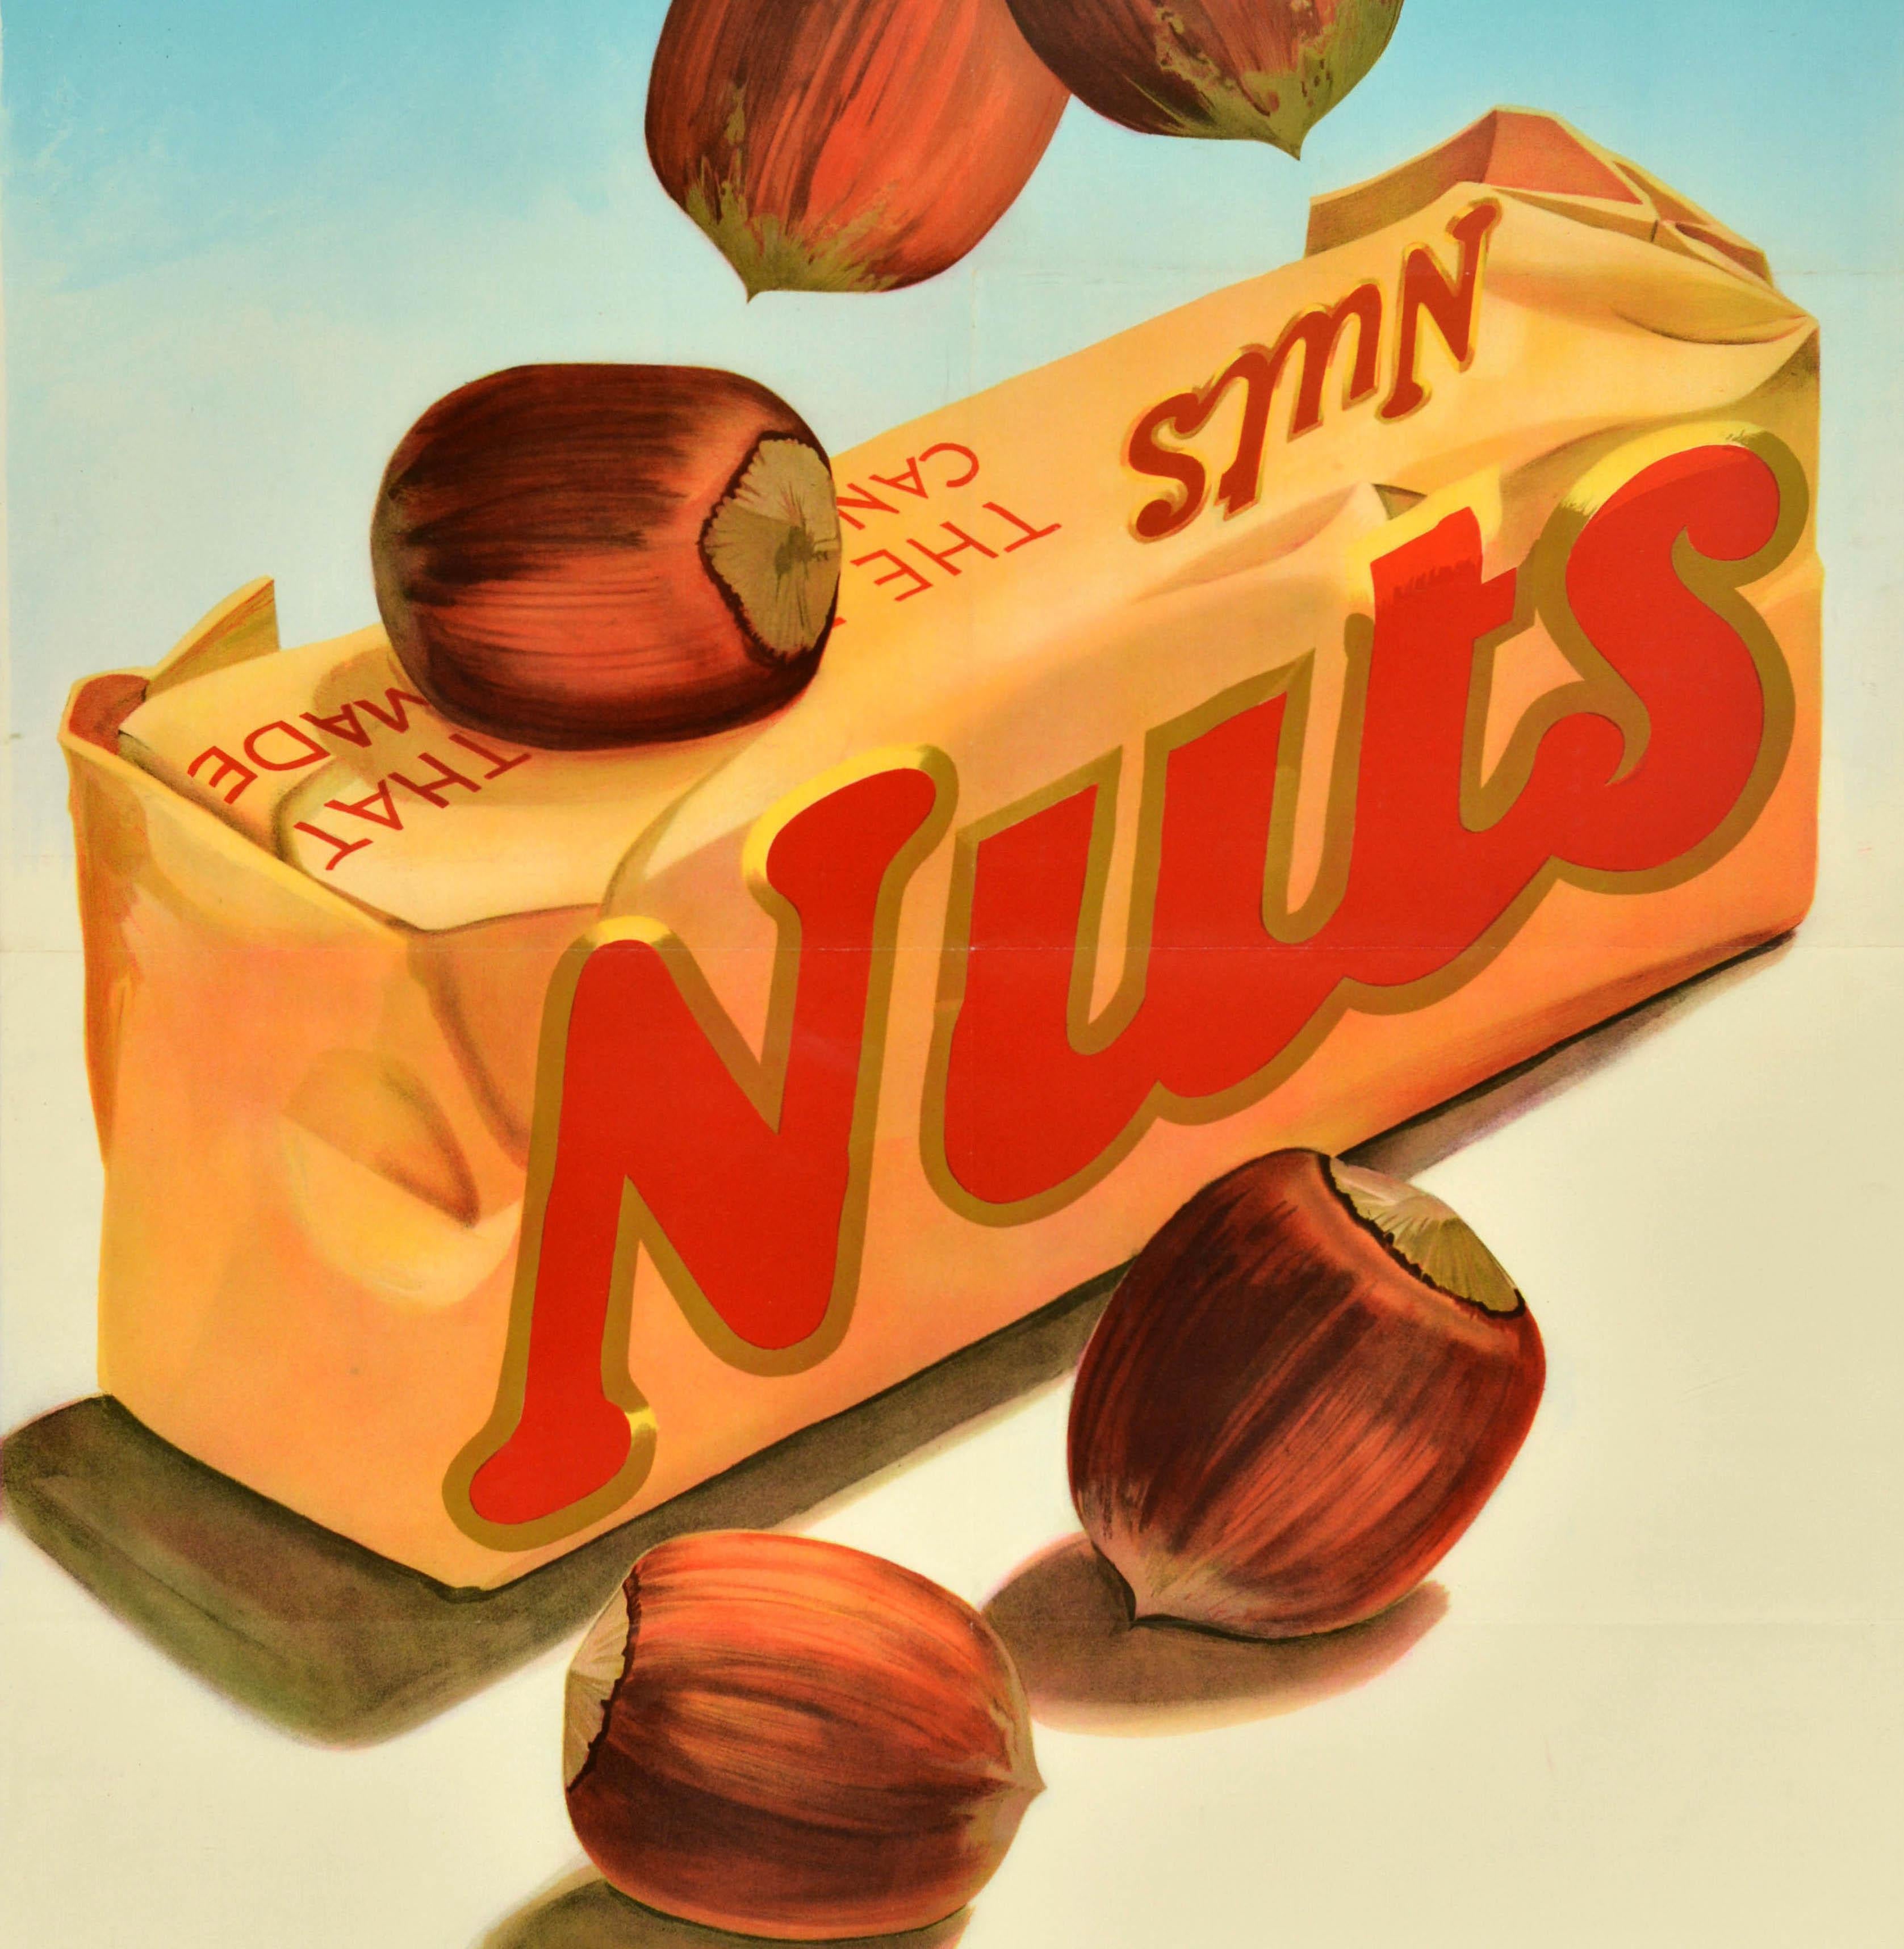 Original Vintage Food Advertising Poster Nuts Chocolate Bar Delicious Product - Print by Unknown